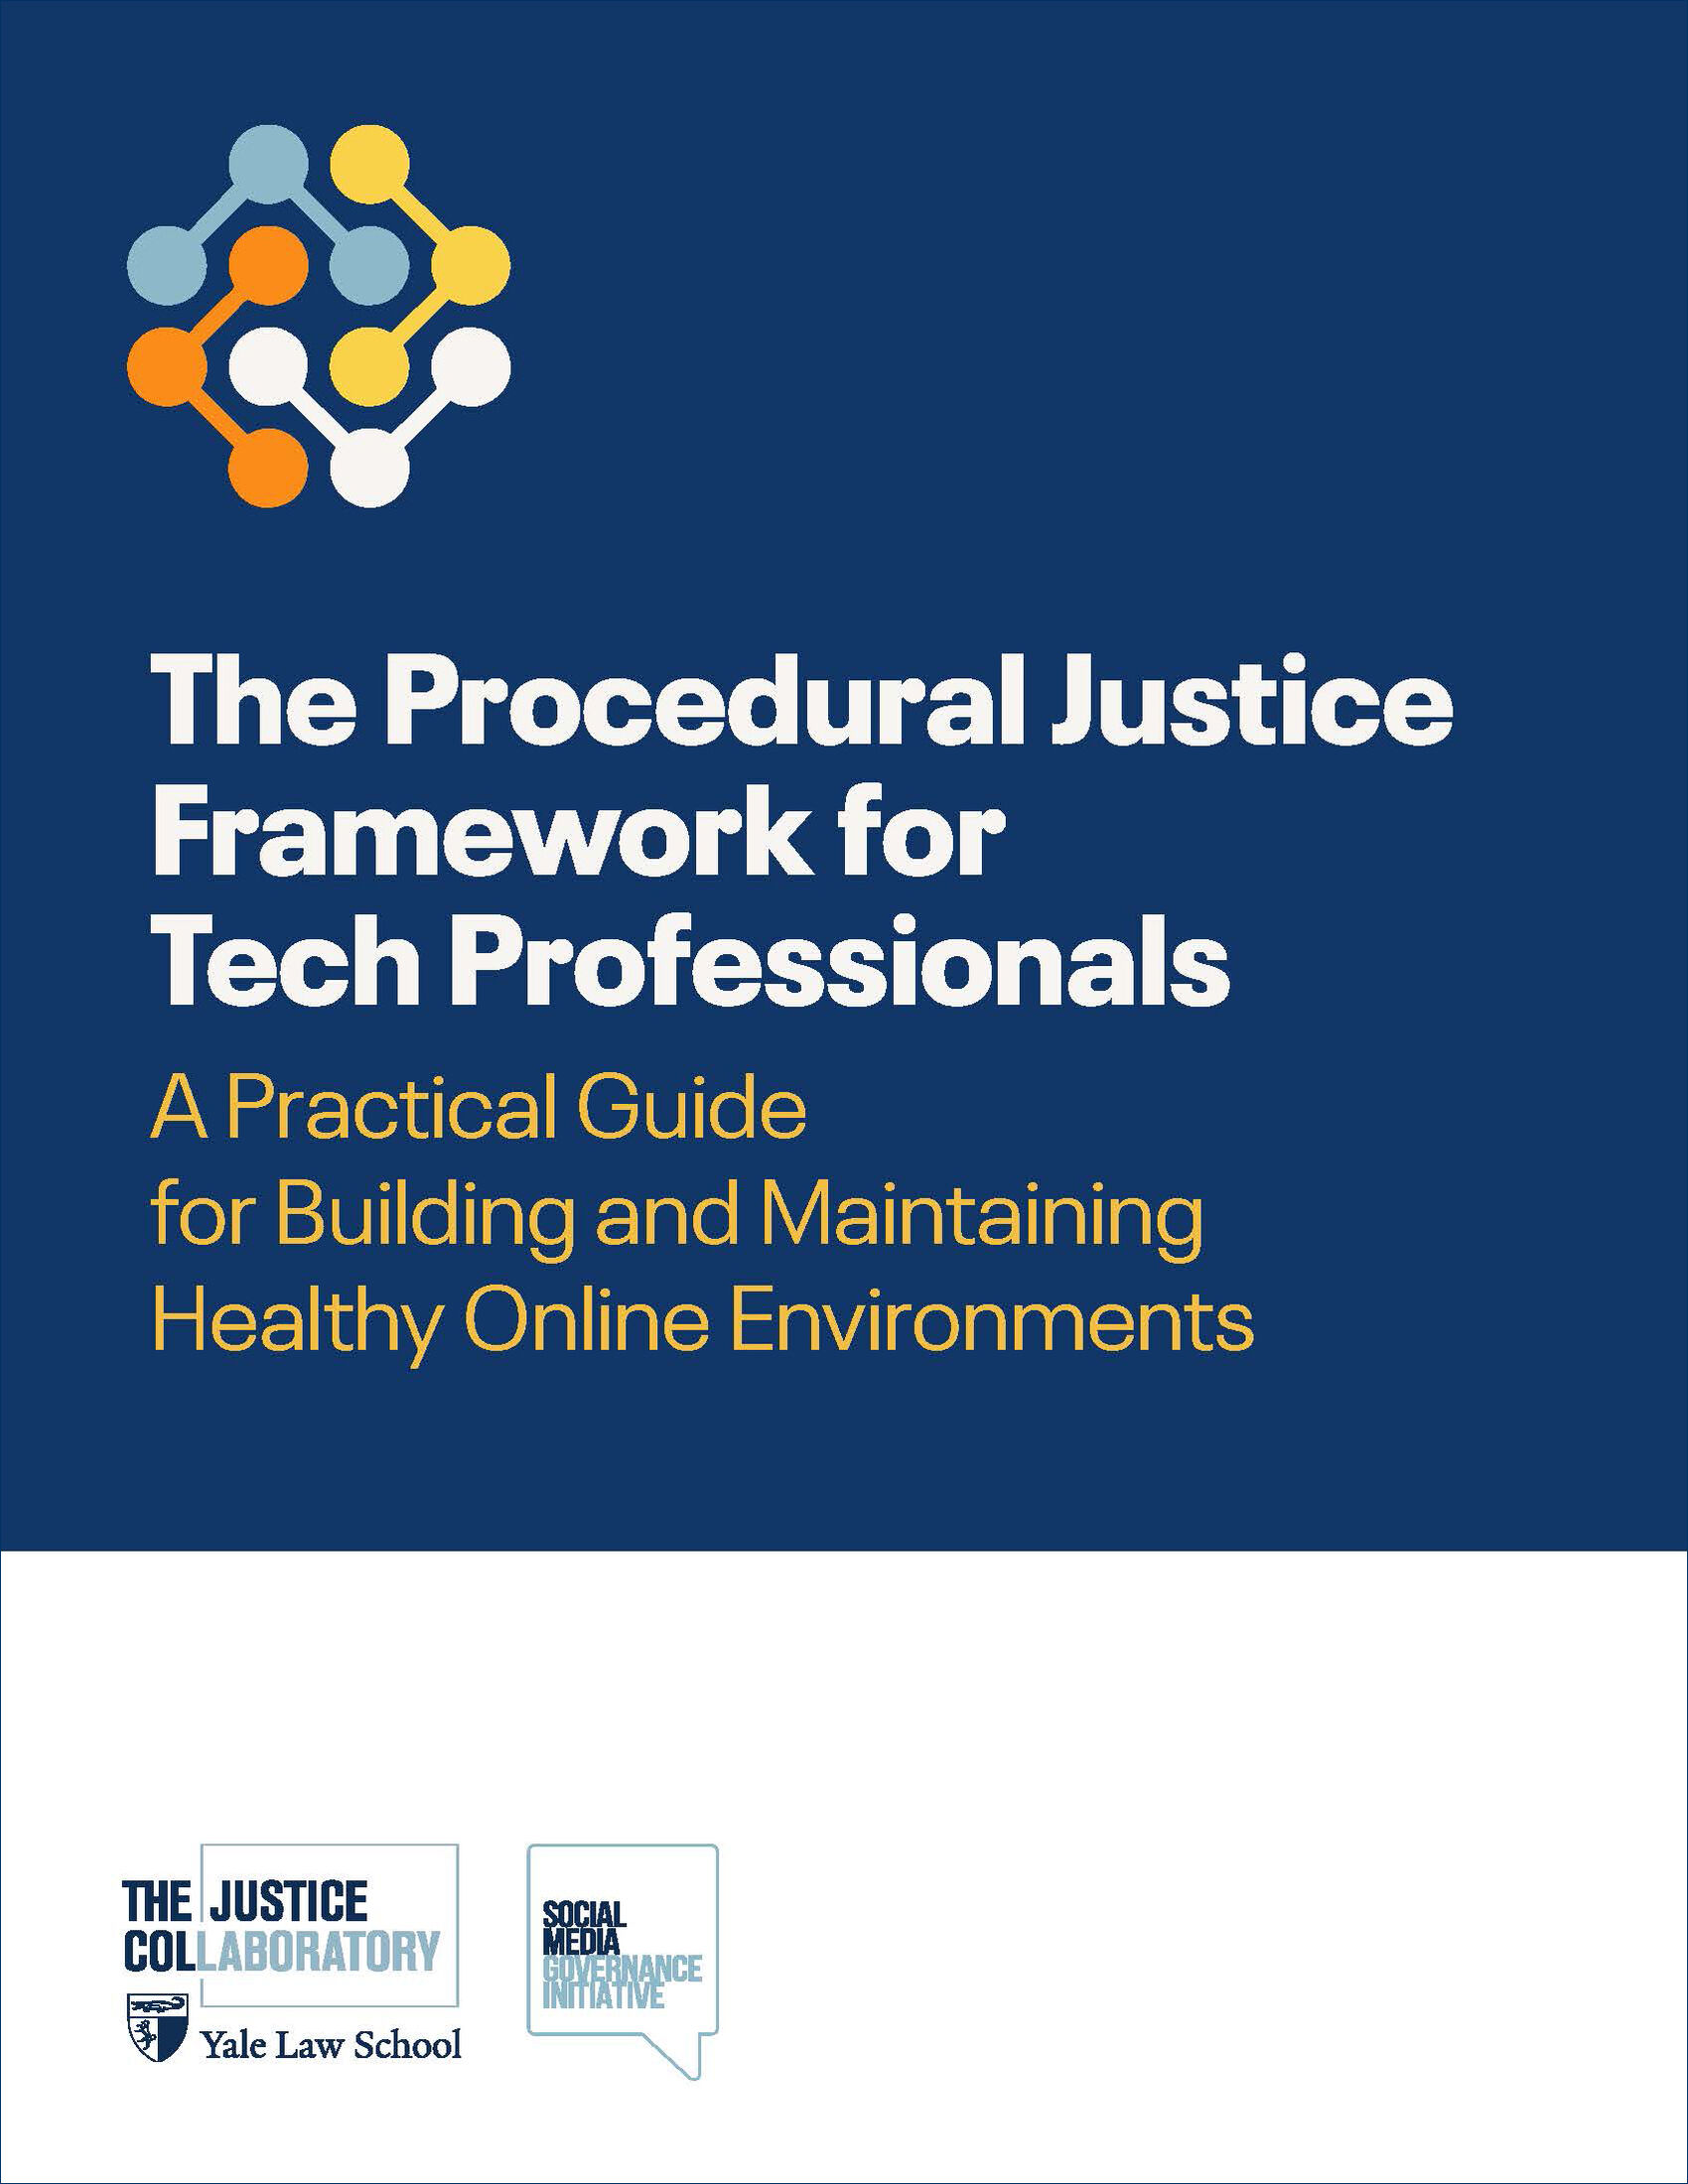 Blue and white background with text "The Procedural Justice Framework for Tech Professionals A Practical Guide for Building and Maintaining Healthy Online Environments"